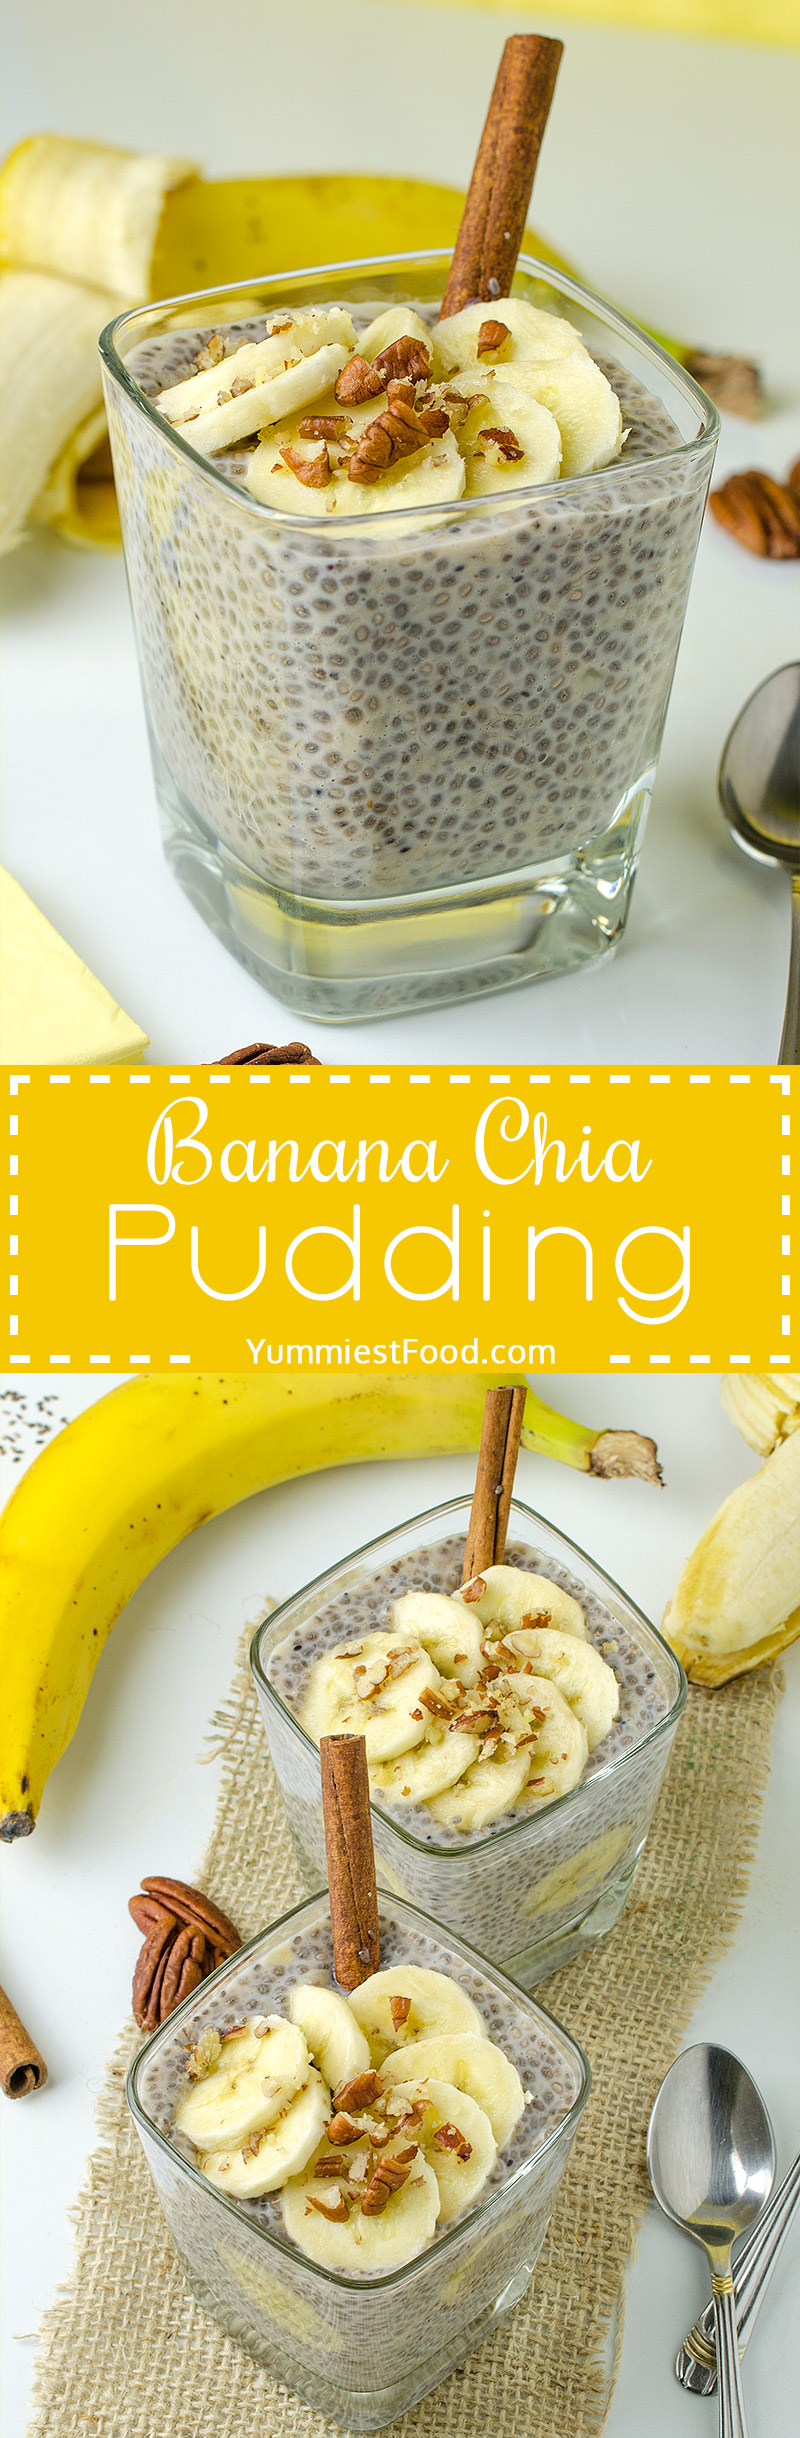 Healthy, Easy Breakfast Banana Chia Pudding - so tasty, simple and healthy enough to have it for breakfast